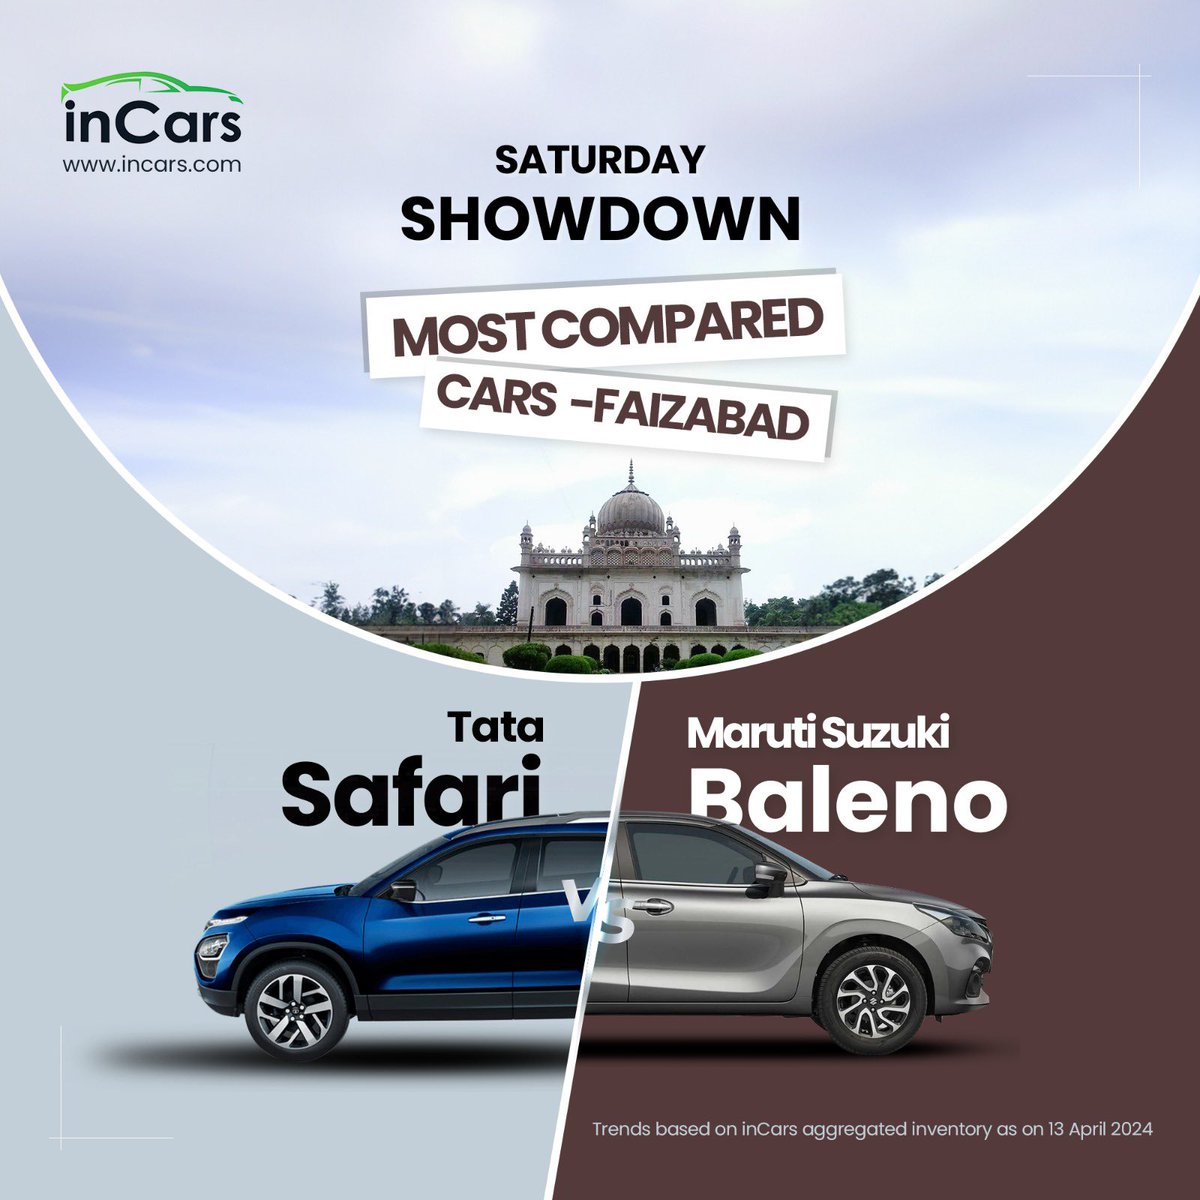 Today, “Daily Wheels” reveals the Most Compared Cars in Faizabad ✨ Get ready for the showdown 🤩 Stay tuned for more updates on Used Cars 🚗 #inCars #inCarsAI #UsedCars #UsedCarSearch #UsedCarsMarket #SecondHandCars #DailyWheels #MostCompared #Faizabad  #UsedCarsInFaizabad